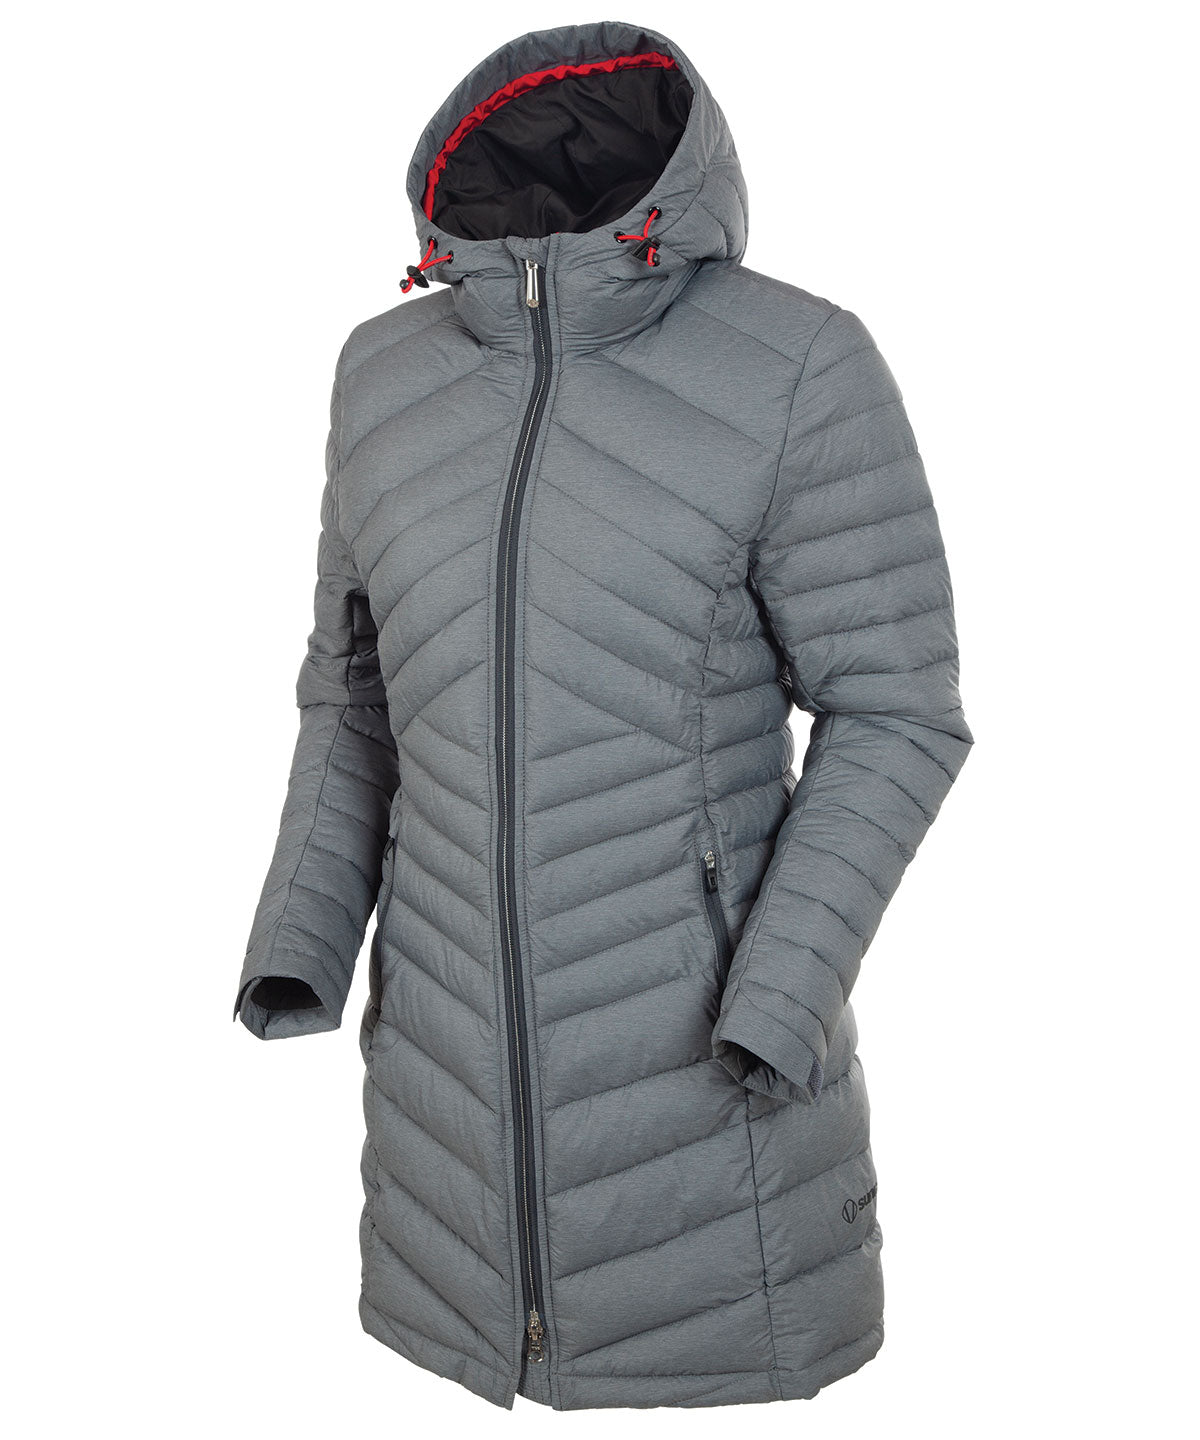 Thermal quilted jacket